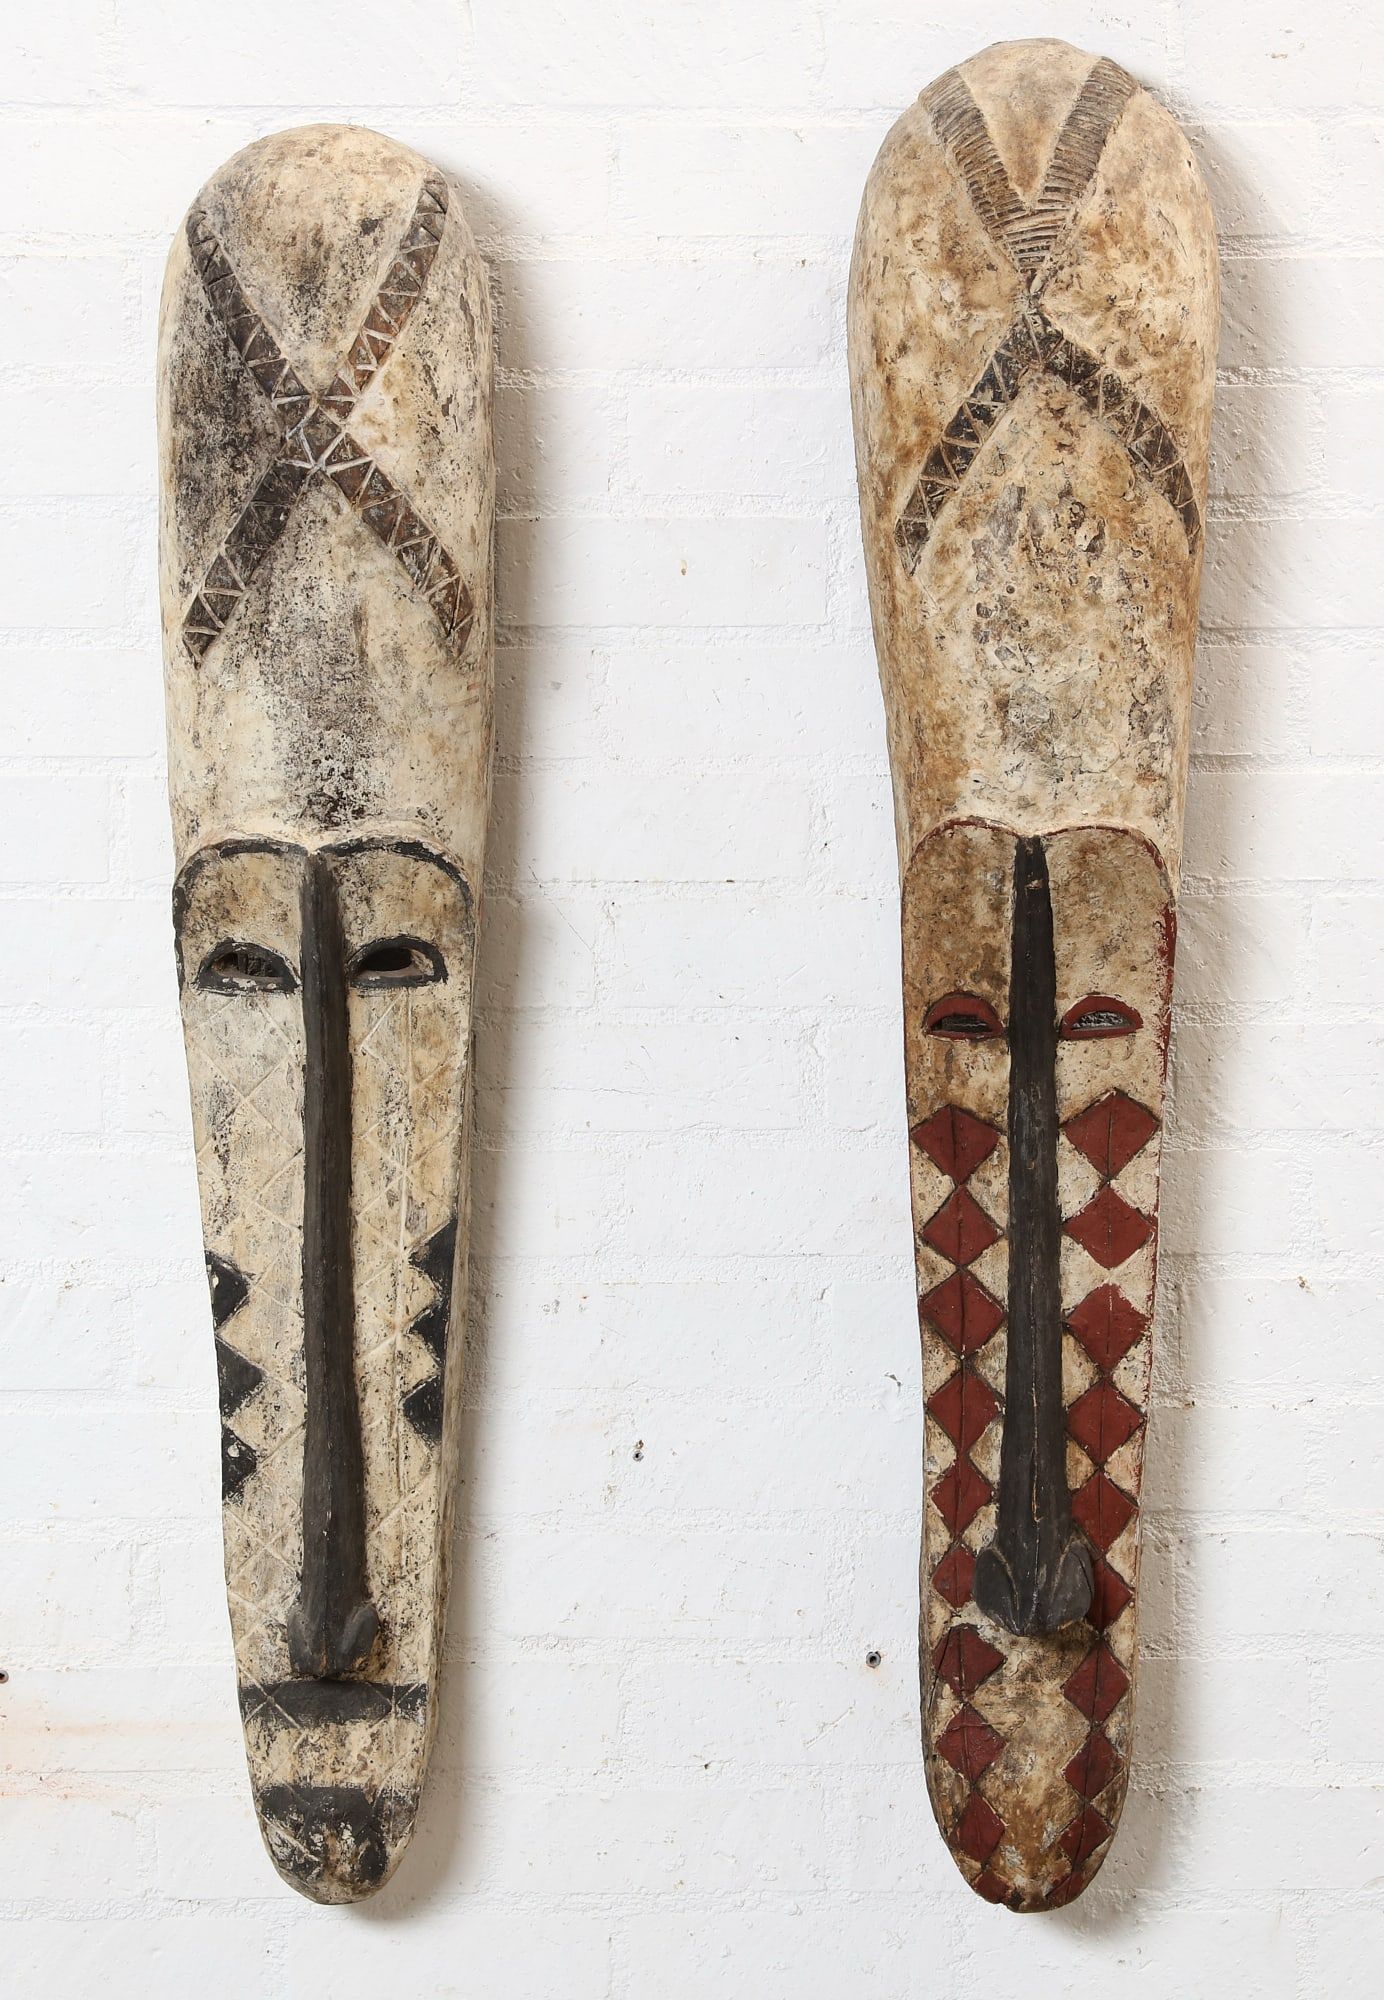 TWO AFRICAN TRIBAL ELONGATED MASKSTwo 2fb2d0e